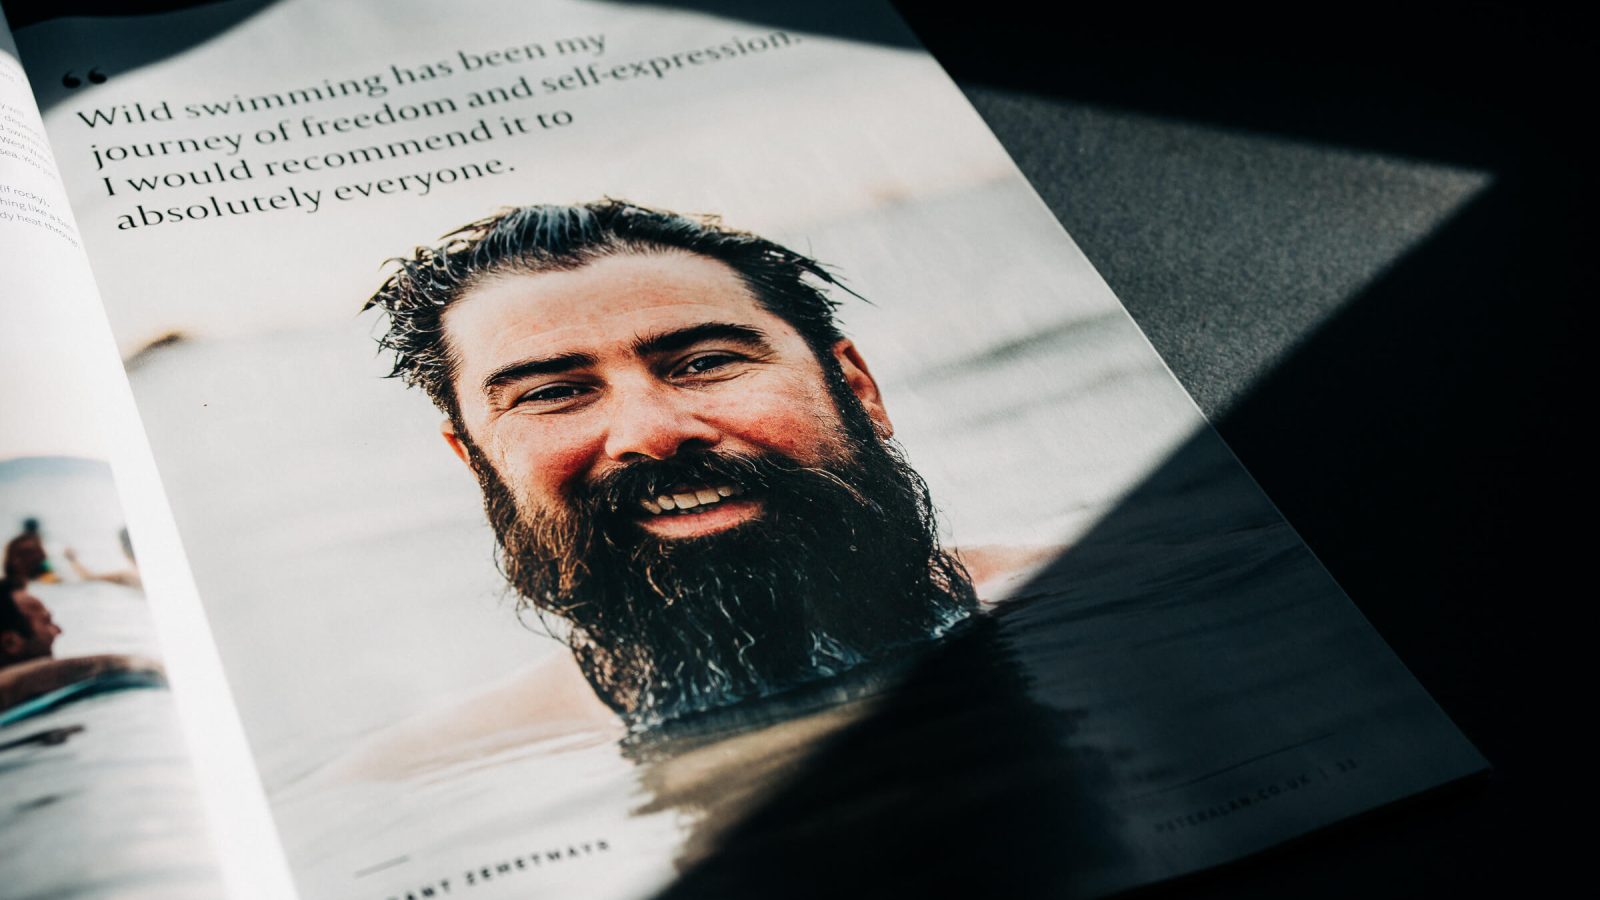 A magazine lies open to a page featuring a portrait of a smiling bearded man in water, with a quote about enjoying wild swimming, partially cast in shadow by the Design Agency UK.